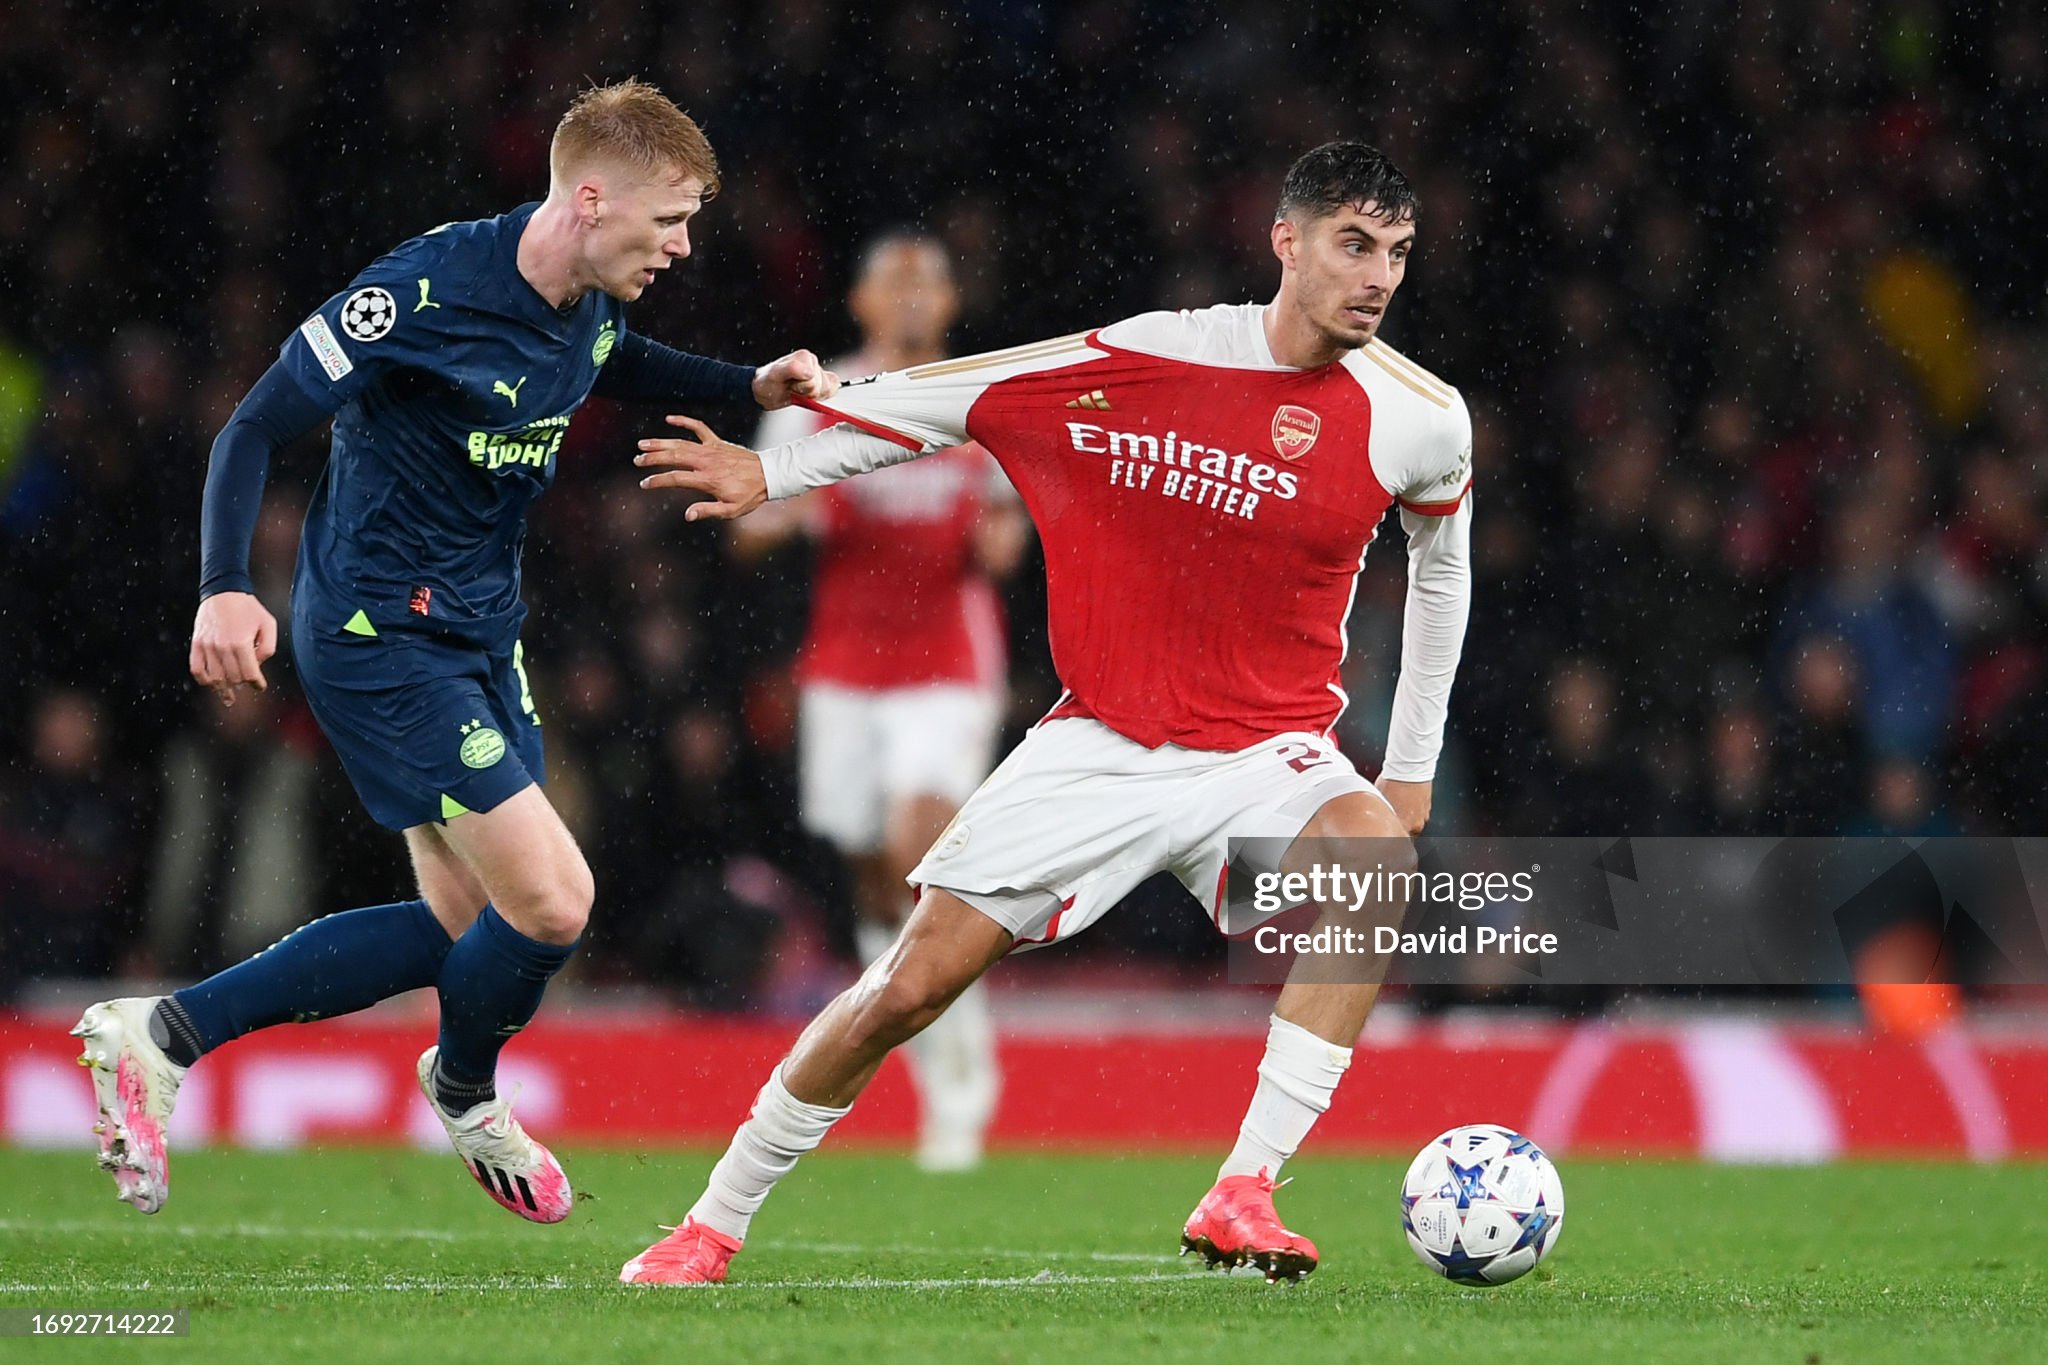 Schouten gets acquainted with the 43 formations of Arsenal